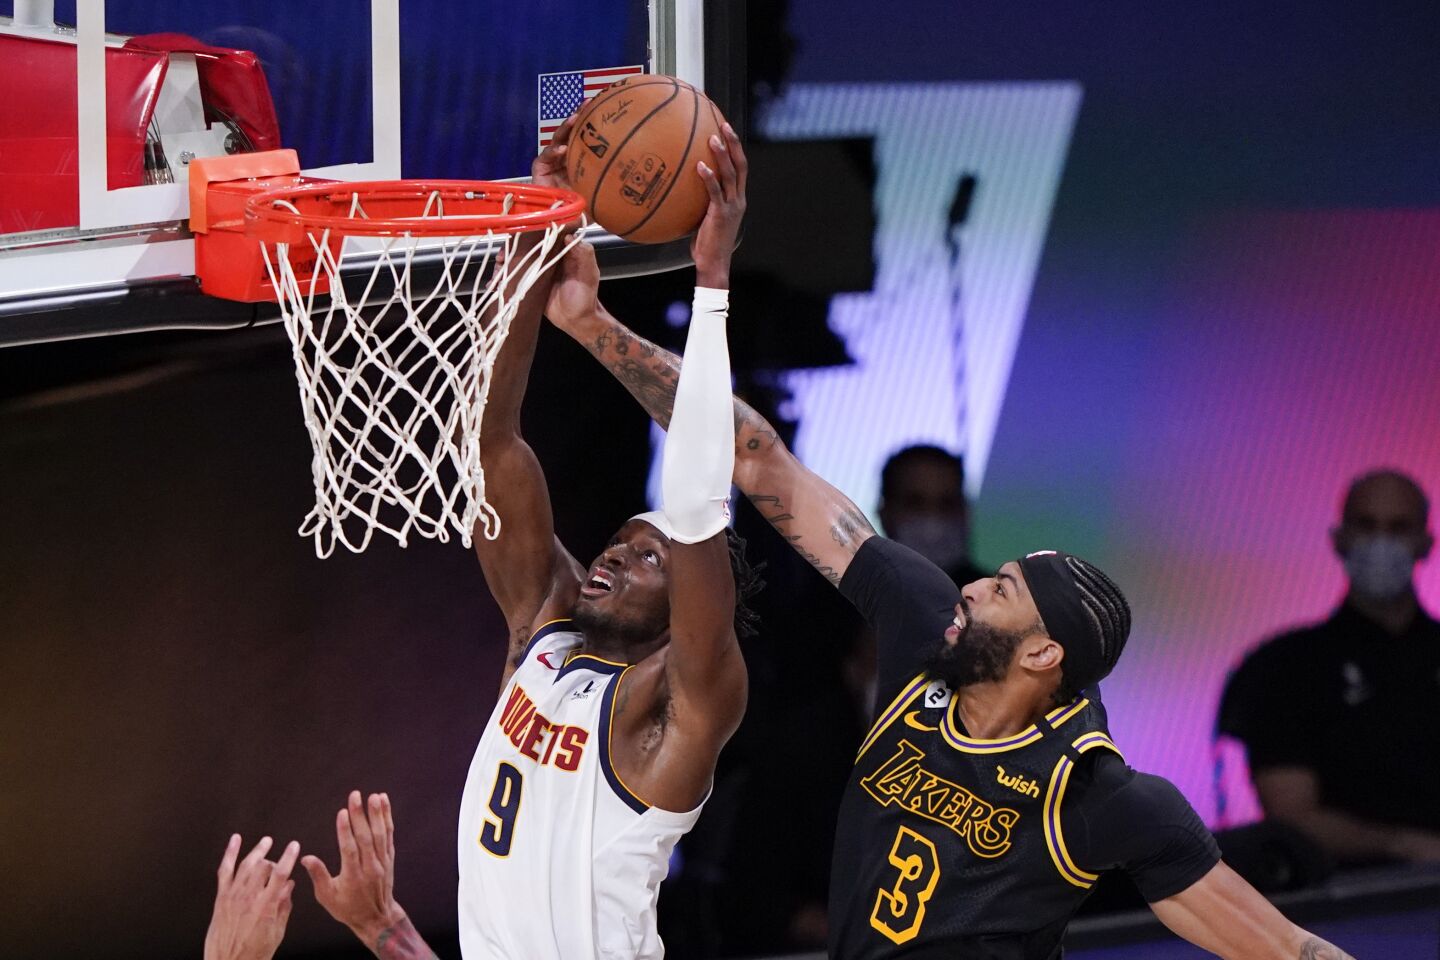 Lakers forward Anthony Davis tries to block a shot by Nuggets forward Jerami Grant during Game 2.